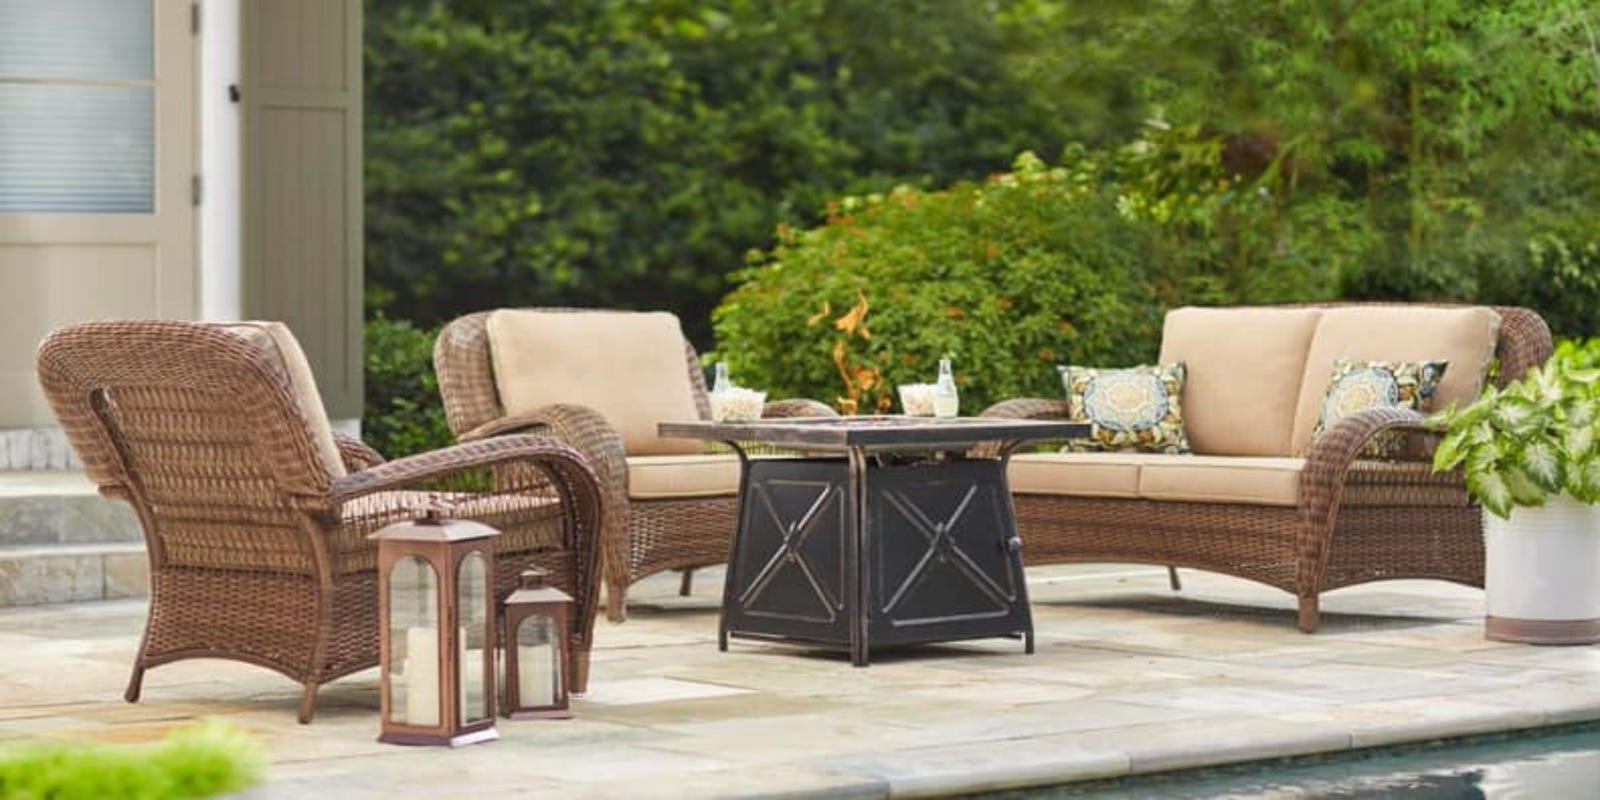 The Best Patio Furniture For Sale